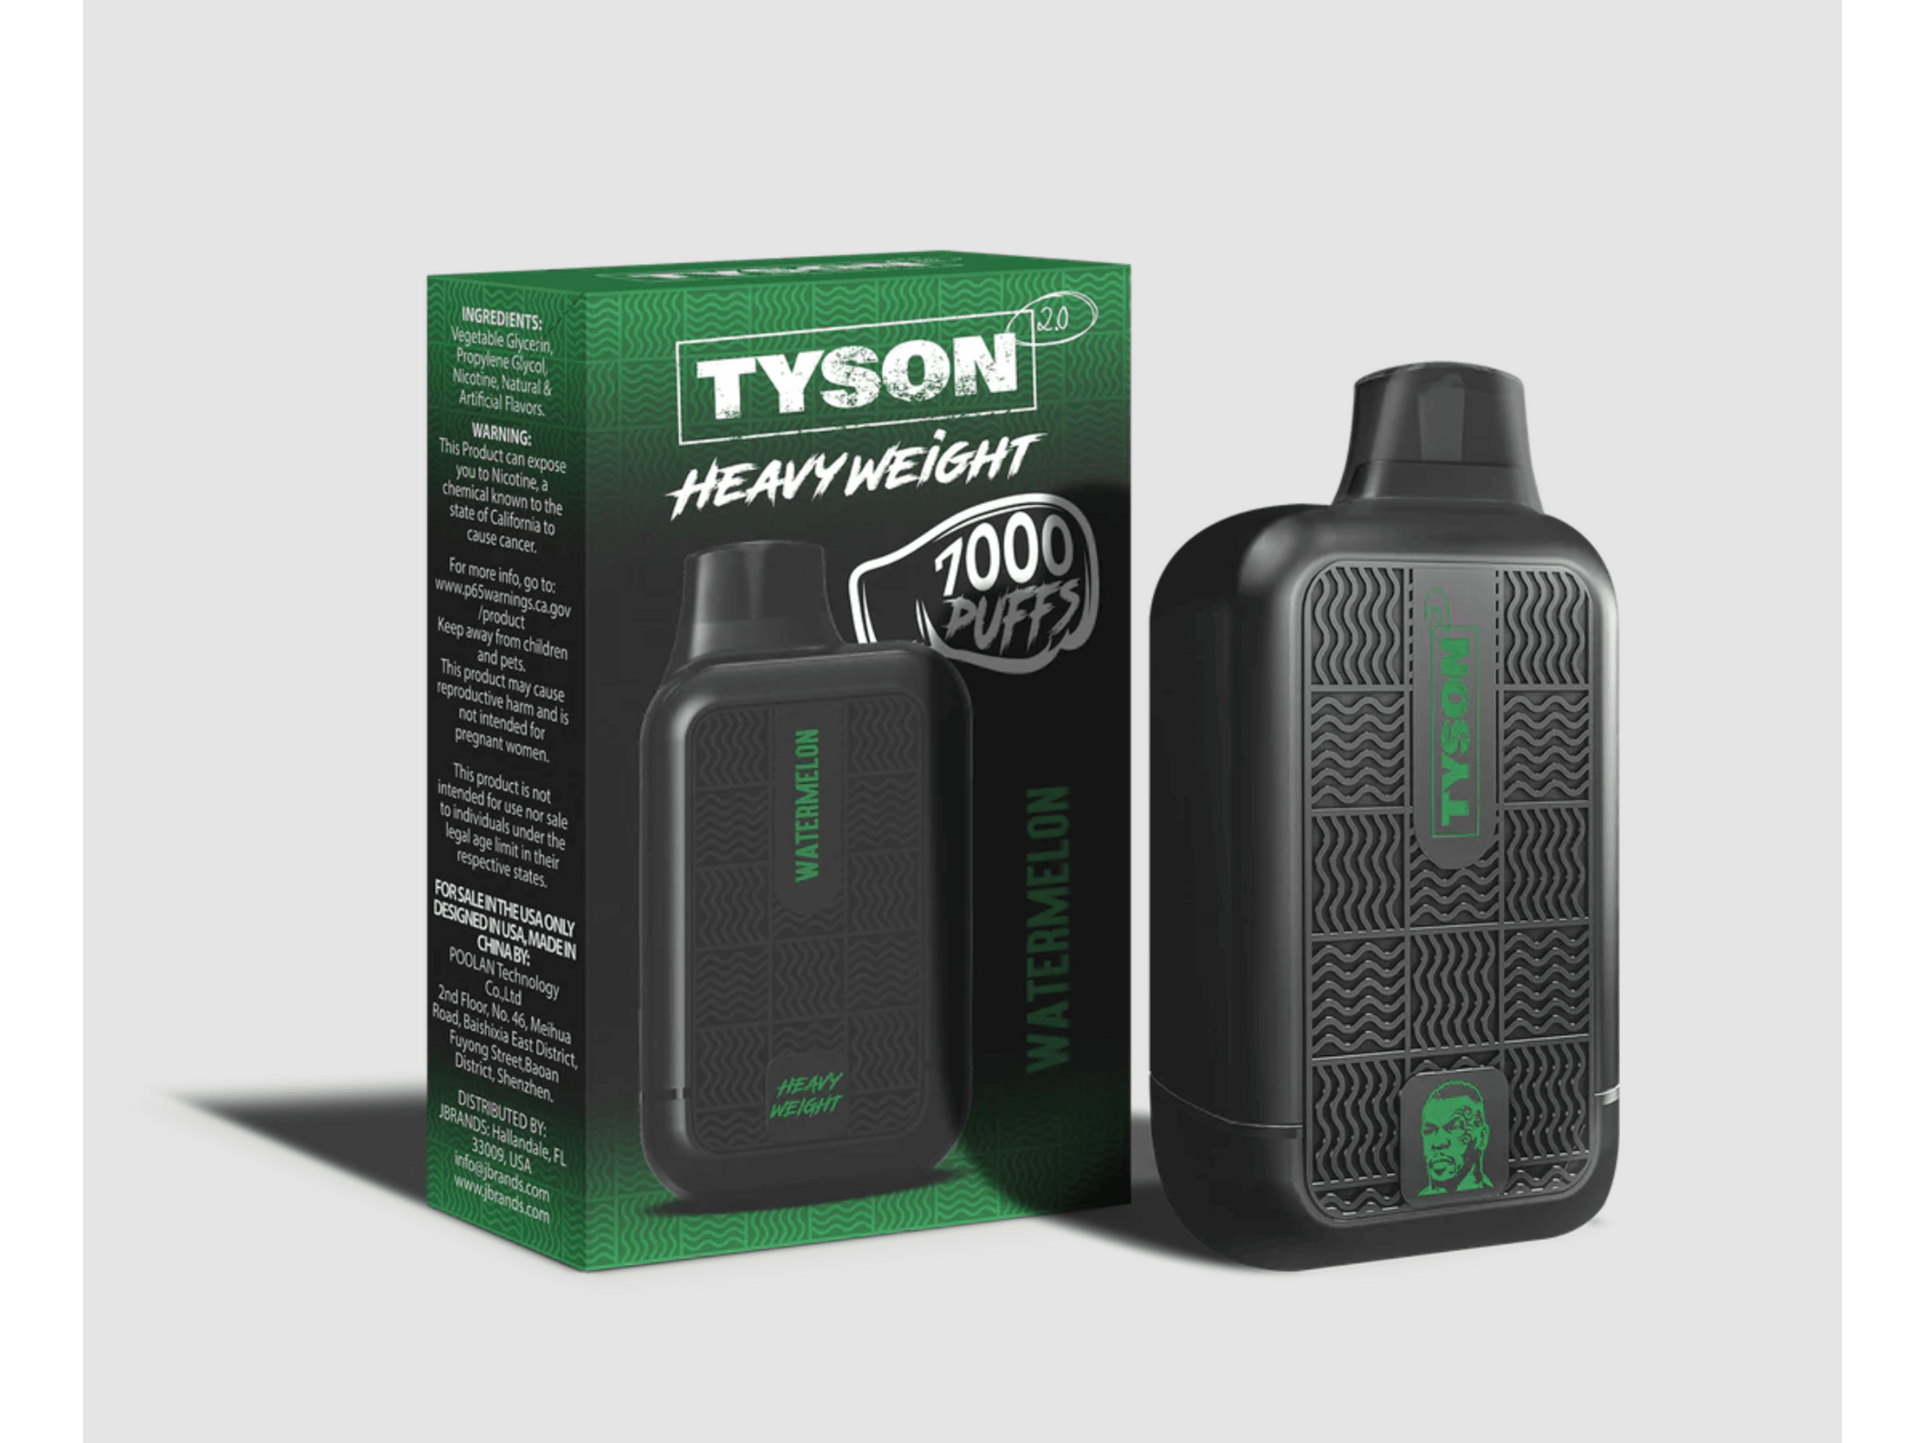 Tyson Heavyweight Watermelon flavored disposable vape device and box.